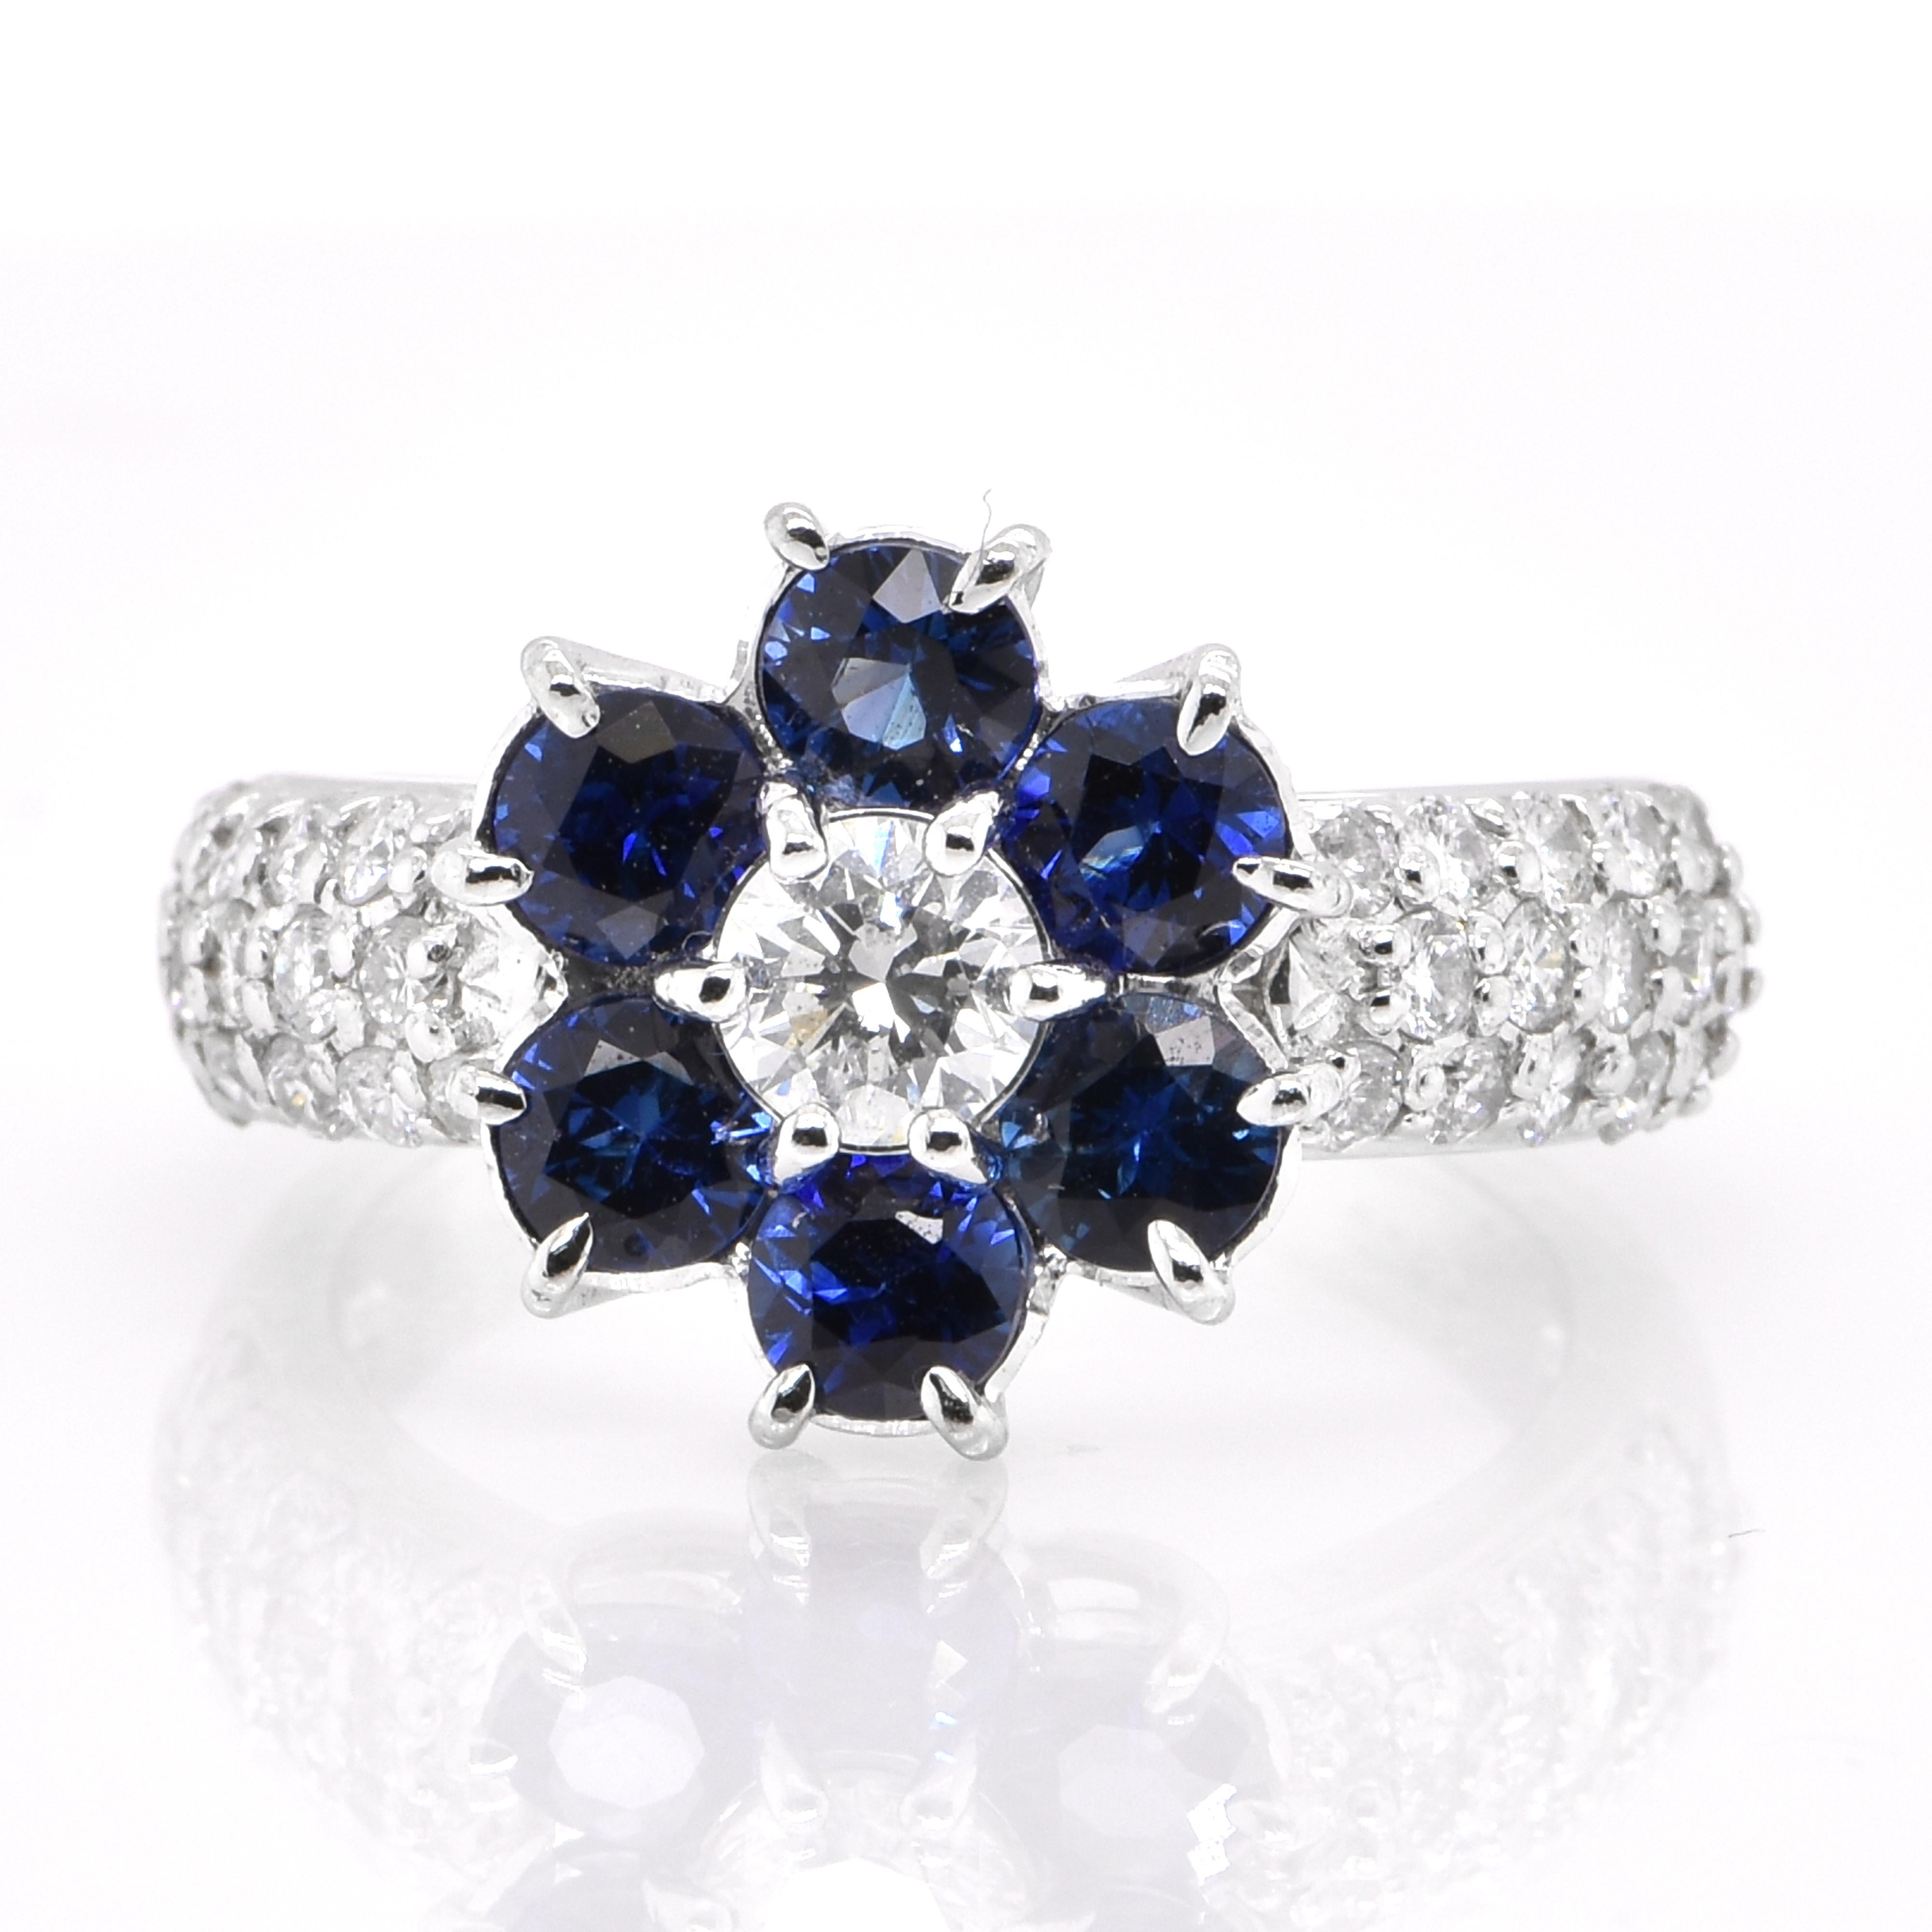 A beautiful ring featuring 1.29 Carat Natural Blue Sapphire and 0.84 Carat Diamond set in Platinum. Sapphires have extraordinary durability - they excel in hardness as well as toughness and durability making them very popular in jewelry.